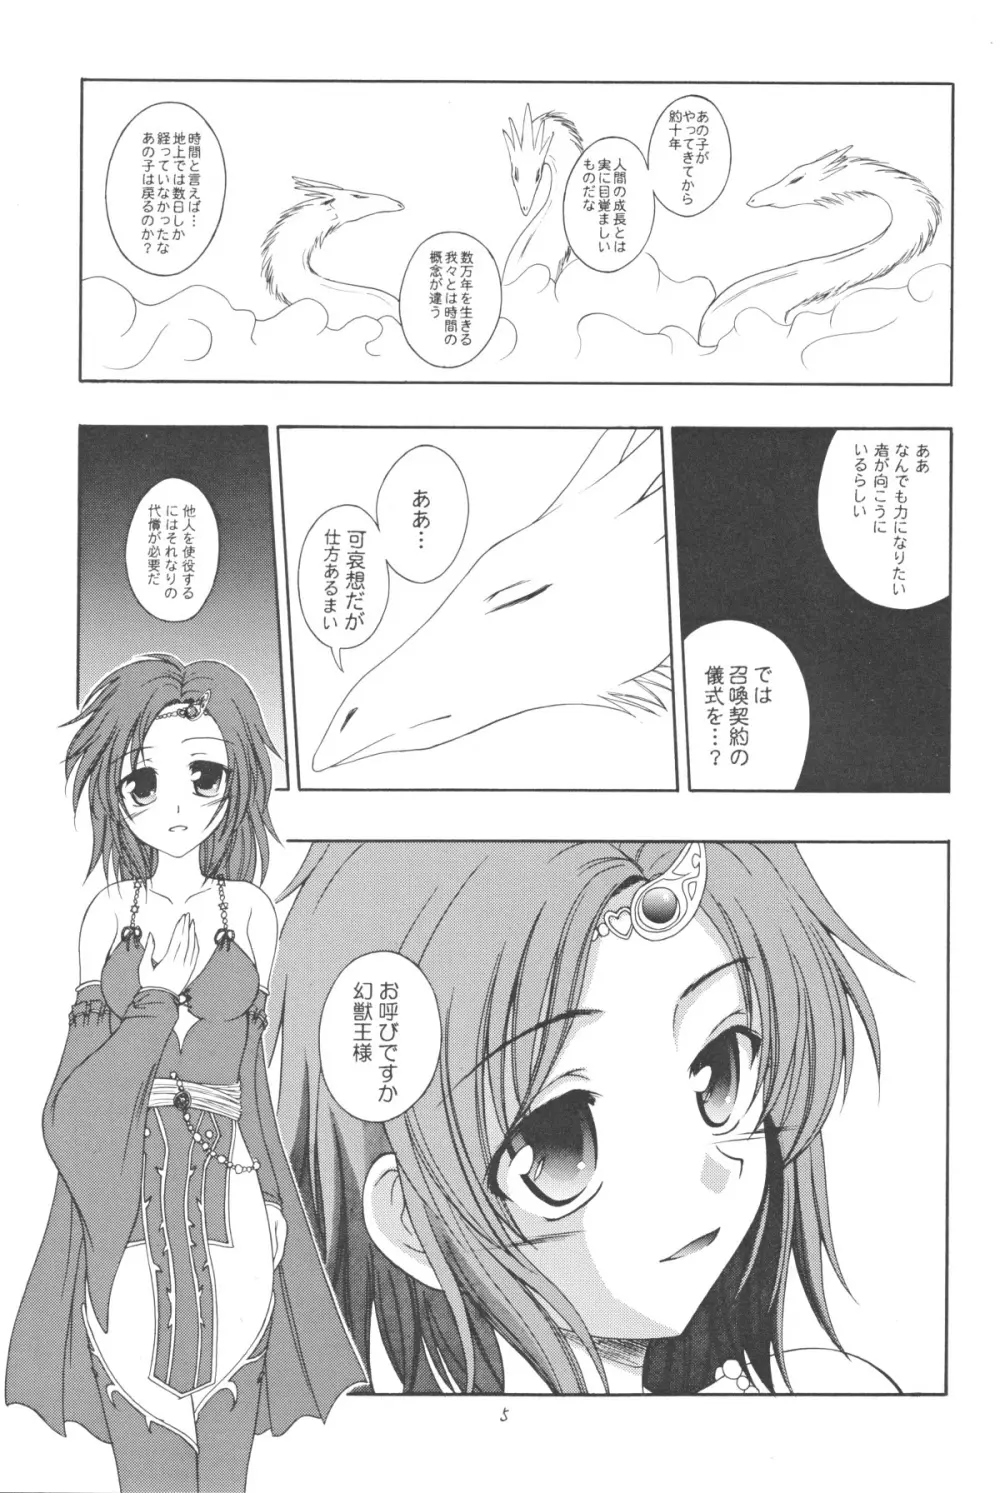 FIRST FUCKがIVP Page.5